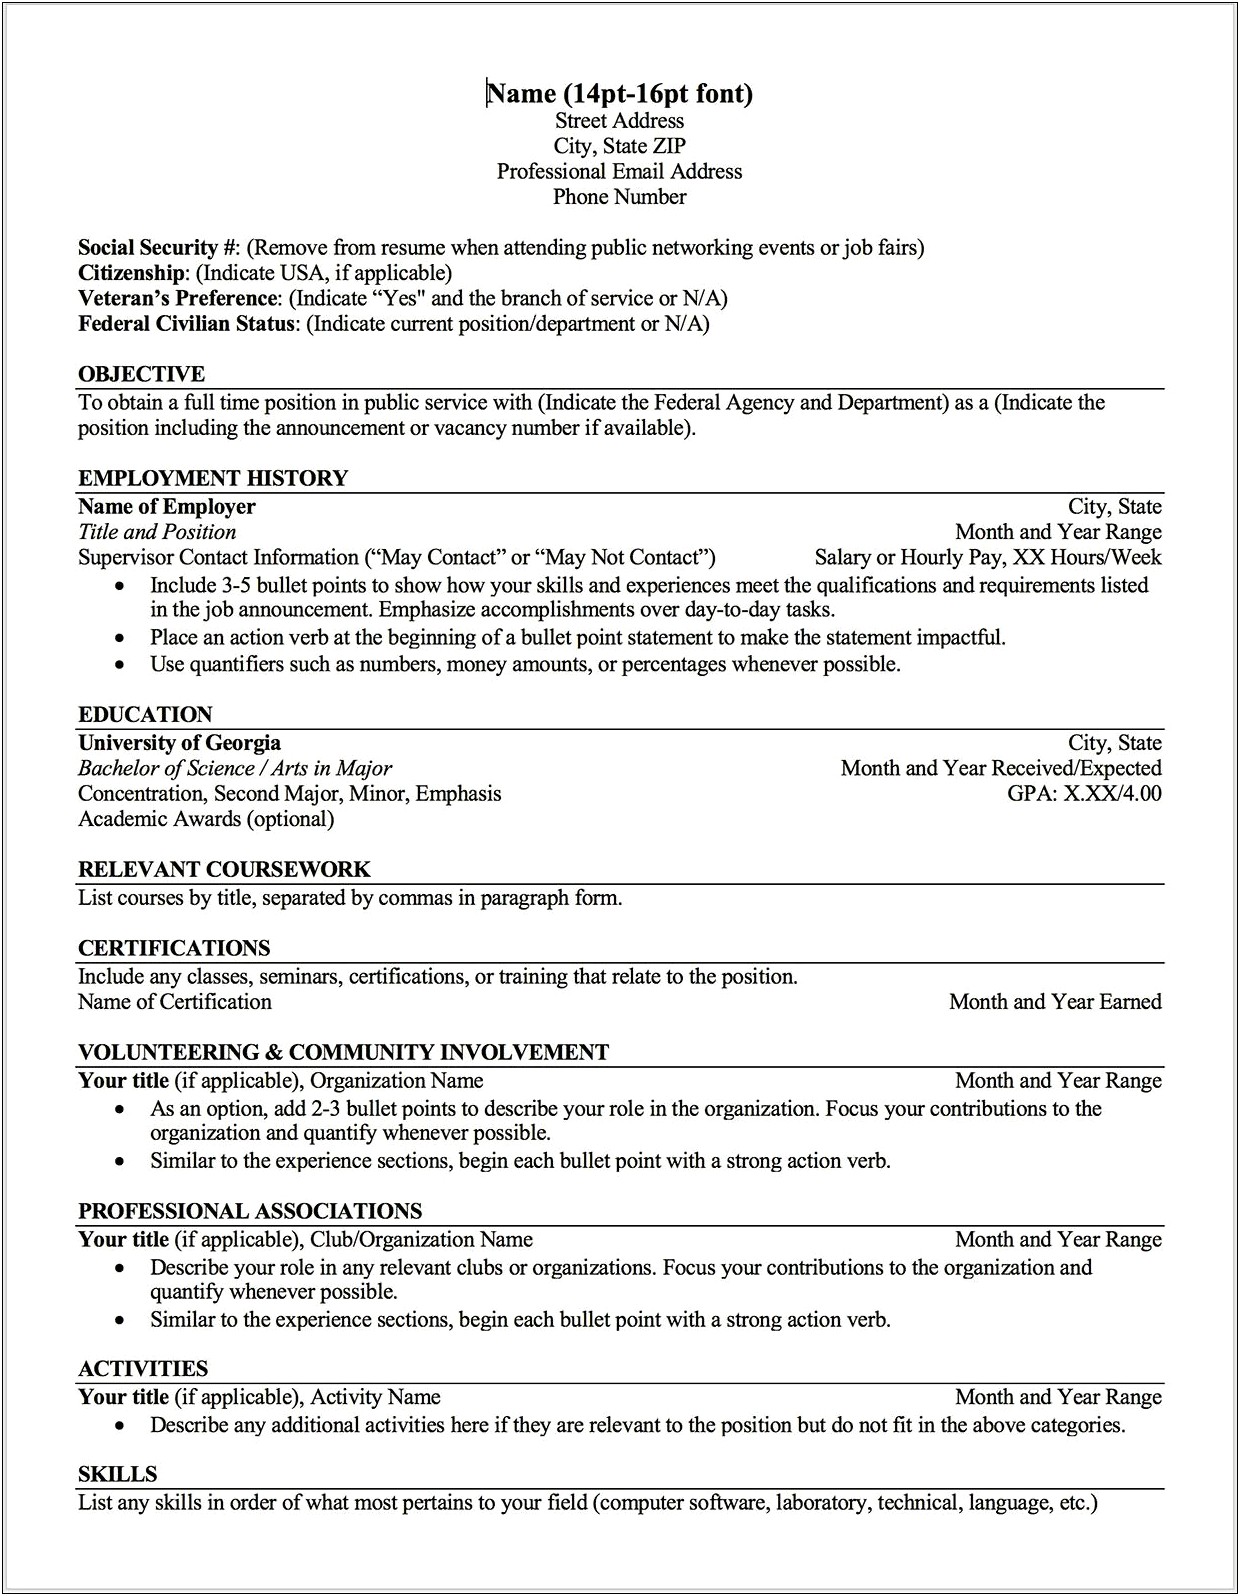 Send Industry And Federal Resume For Federal Job